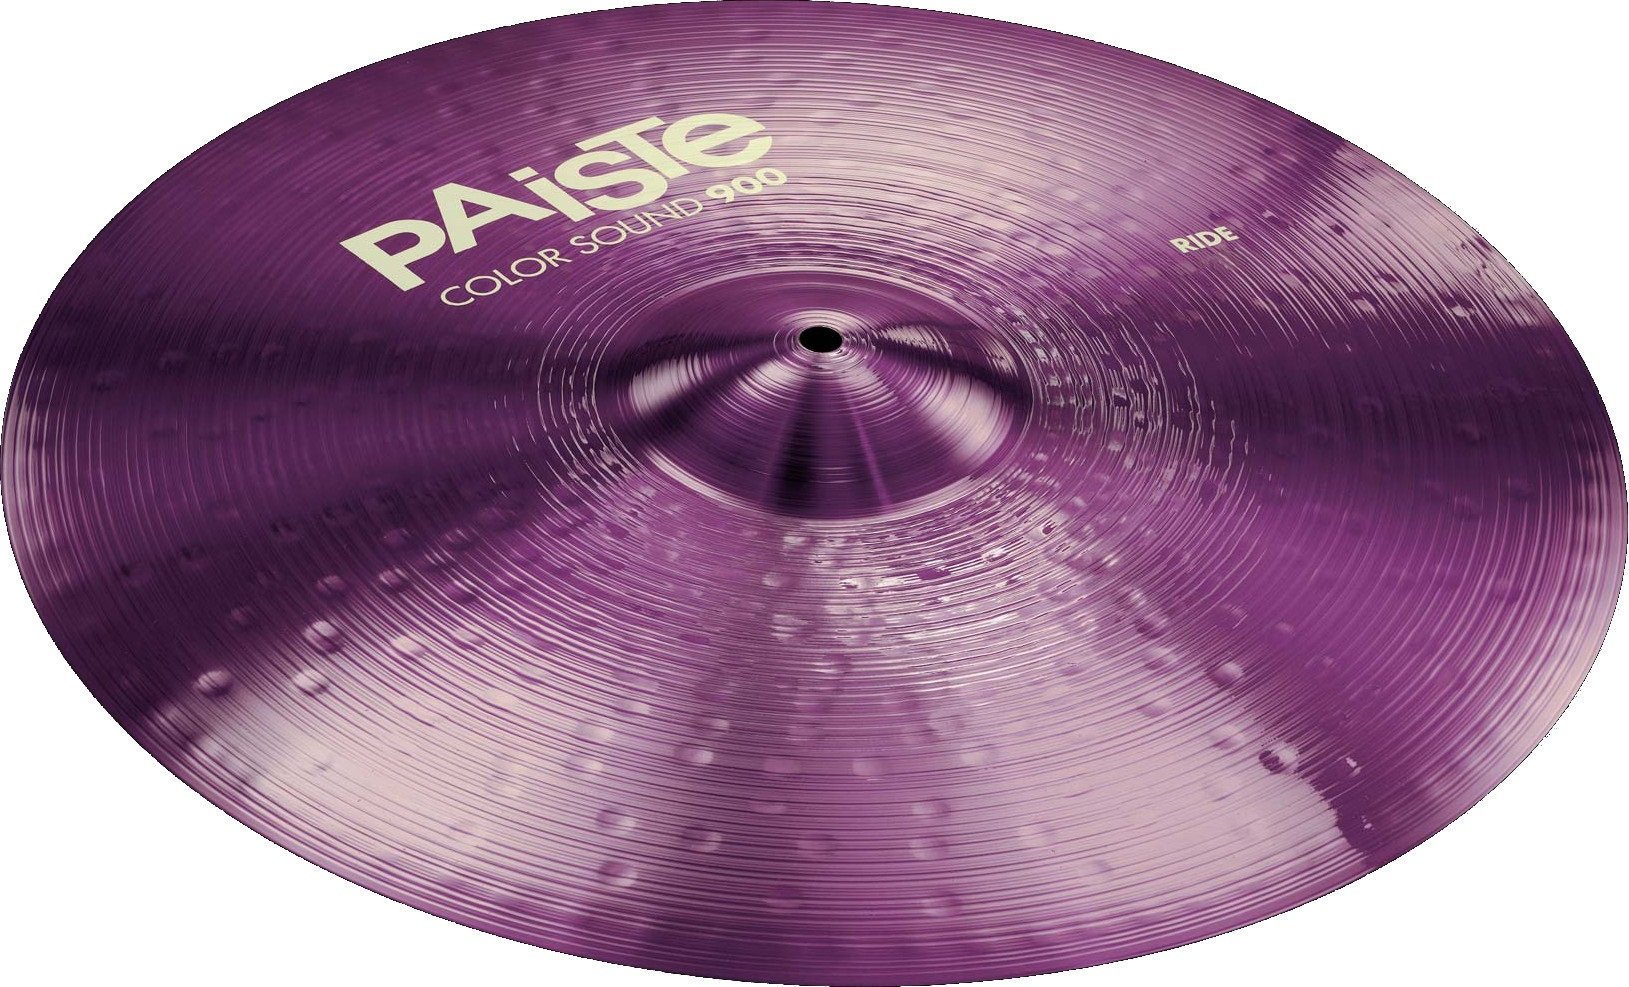 Cymbale ride Paiste Color Sound 900 Cymbale ride 22" Violet